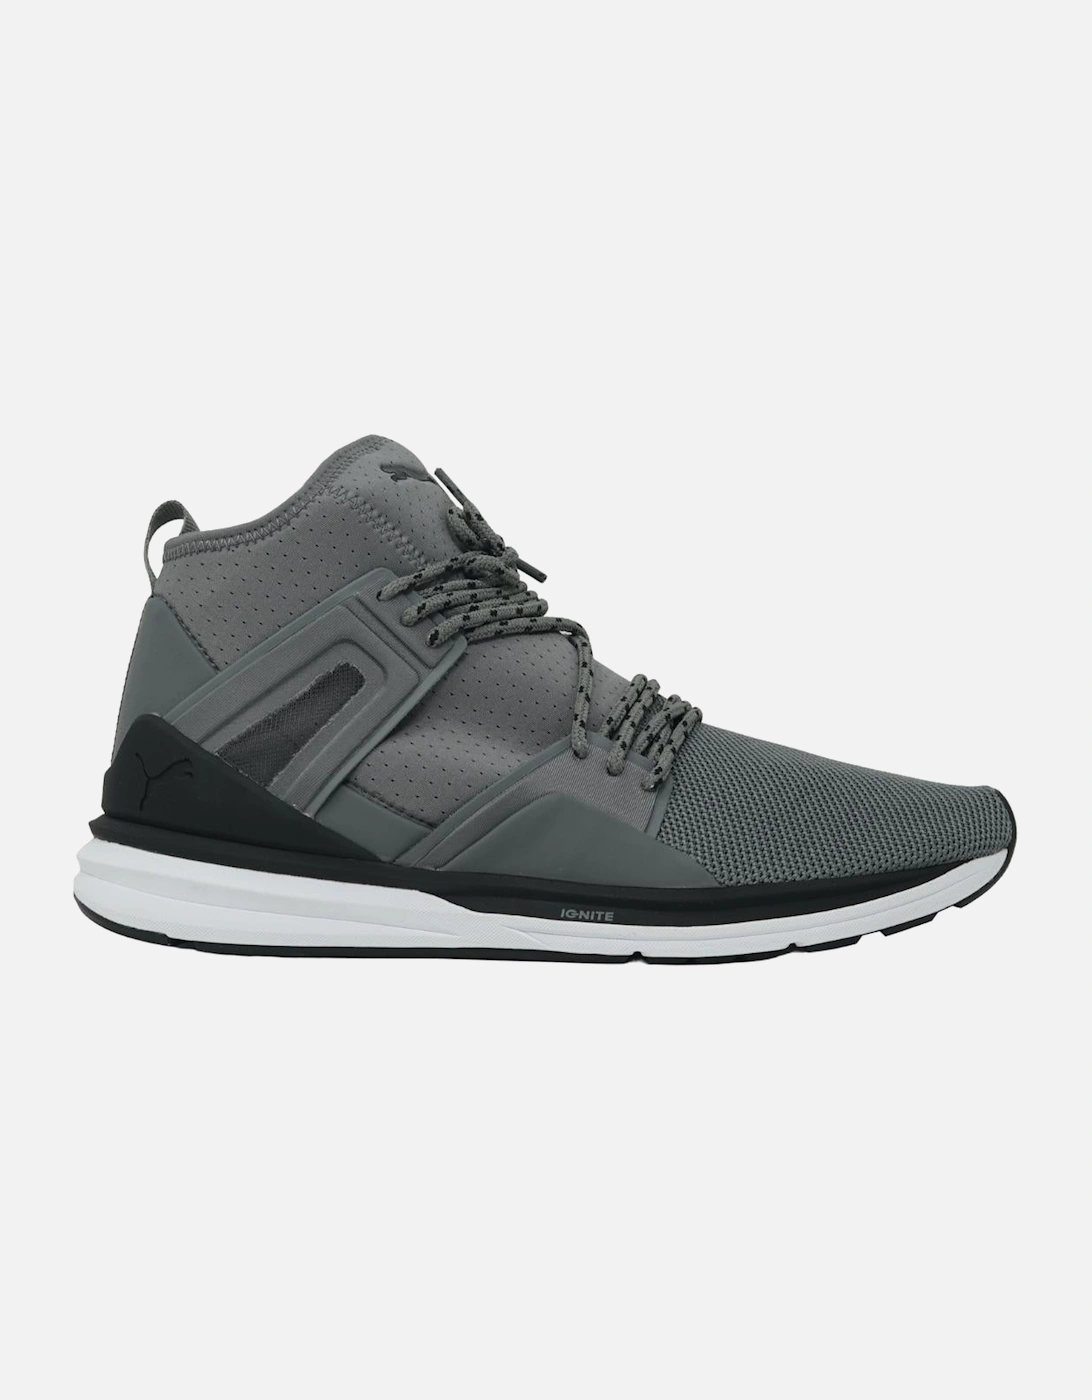 B.O.G Limitless Hi Top Grey Trainers, 5 of 4